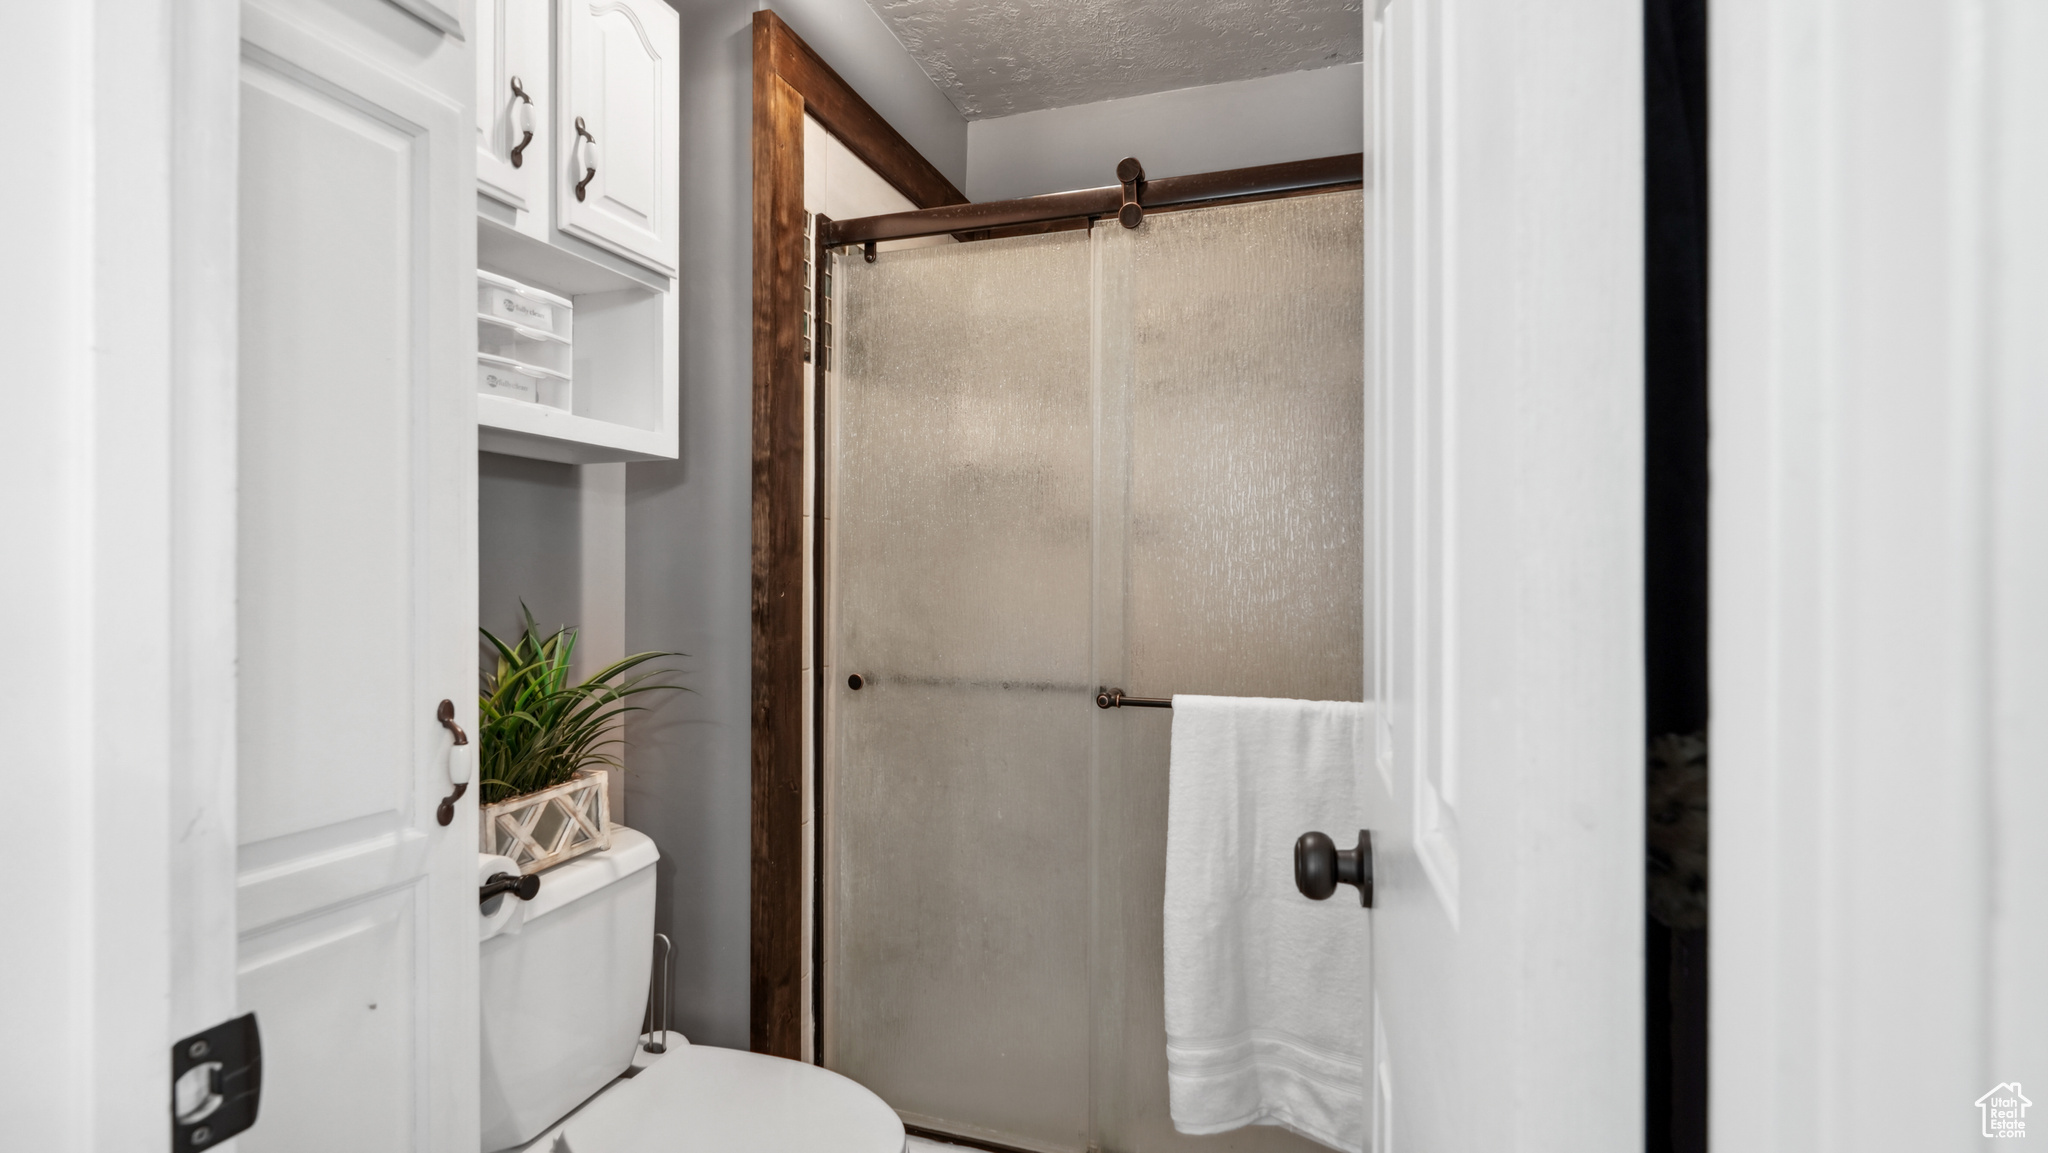 Primary bathroom with a textured ceiling, an enclosed shower, and toilet